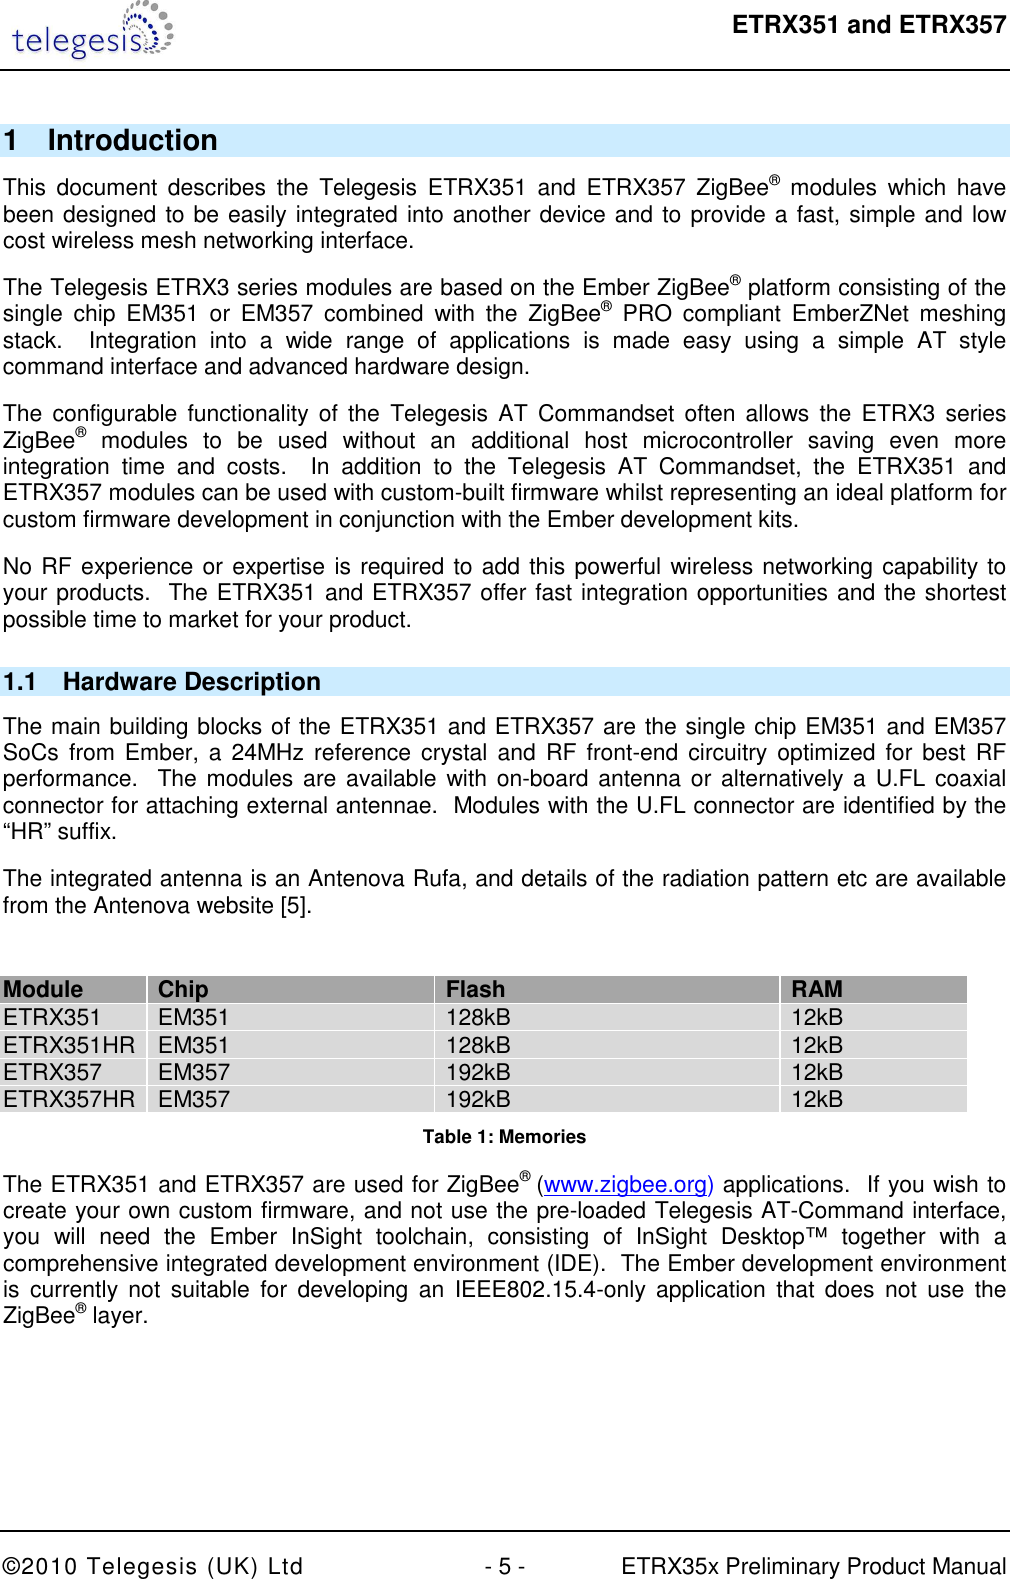  ETRX351 and ETRX357  ©2010 Telegesis (UK) Ltd  - 5 -  ETRX35x Preliminary Product Manual 1  Introduction This  document  describes  the  Telegesis  ETRX351  and  ETRX357  ZigBee®  modules  which  have been designed to be easily integrated into another device and to provide a fast, simple and low cost wireless mesh networking interface. The Telegesis ETRX3 series modules are based on the Ember ZigBee® platform consisting of the single  chip  EM351  or  EM357  combined  with  the  ZigBee®  PRO  compliant  EmberZNet  meshing stack.    Integration  into  a  wide  range  of  applications  is  made  easy  using  a  simple  AT  style command interface and advanced hardware design. The  configurable  functionality  of  the  Telegesis  AT Commandset often allows  the  ETRX3 series ZigBee®  modules  to  be  used  without  an  additional  host  microcontroller  saving  even  more integration  time  and  costs.    In  addition  to  the  Telegesis  AT  Commandset,  the  ETRX351  and ETRX357 modules can be used with custom-built firmware whilst representing an ideal platform for custom firmware development in conjunction with the Ember development kits. No RF experience or expertise is required to add this powerful wireless networking capability to your products.  The ETRX351 and ETRX357 offer fast integration opportunities and the shortest possible time to market for your product. 1.1  Hardware Description The main building blocks of the ETRX351 and ETRX357 are the single chip EM351 and EM357 SoCs  from  Ember, a 24MHz reference crystal  and RF front-end  circuitry  optimized for best  RF performance.  The modules are available with on-board antenna or alternatively a U.FL coaxial connector for attaching external antennae.  Modules with the U.FL connector are identified by the “HR” suffix. The integrated antenna is an Antenova Rufa, and details of the radiation pattern etc are available from the Antenova website [5].  Module Chip Flash RAM ETRX351 EM351 128kB 12kB ETRX351HR EM351 128kB 12kB ETRX357  EM357  192kB  12kB ETRX357HR EM357 192kB 12kB Table 1: Memories The ETRX351 and ETRX357 are used for ZigBee® (www.zigbee.org) applications.  If you wish to create your own custom firmware, and not use the pre-loaded Telegesis AT-Command interface, you  will  need  the  Ember  InSight  toolchain,  consisting  of  InSight  Desktop™  together  with  a comprehensive integrated development environment (IDE).  The Ember development environment is  currently  not  suitable  for  developing  an  IEEE802.15.4-only application  that  does  not  use  the ZigBee® layer. 